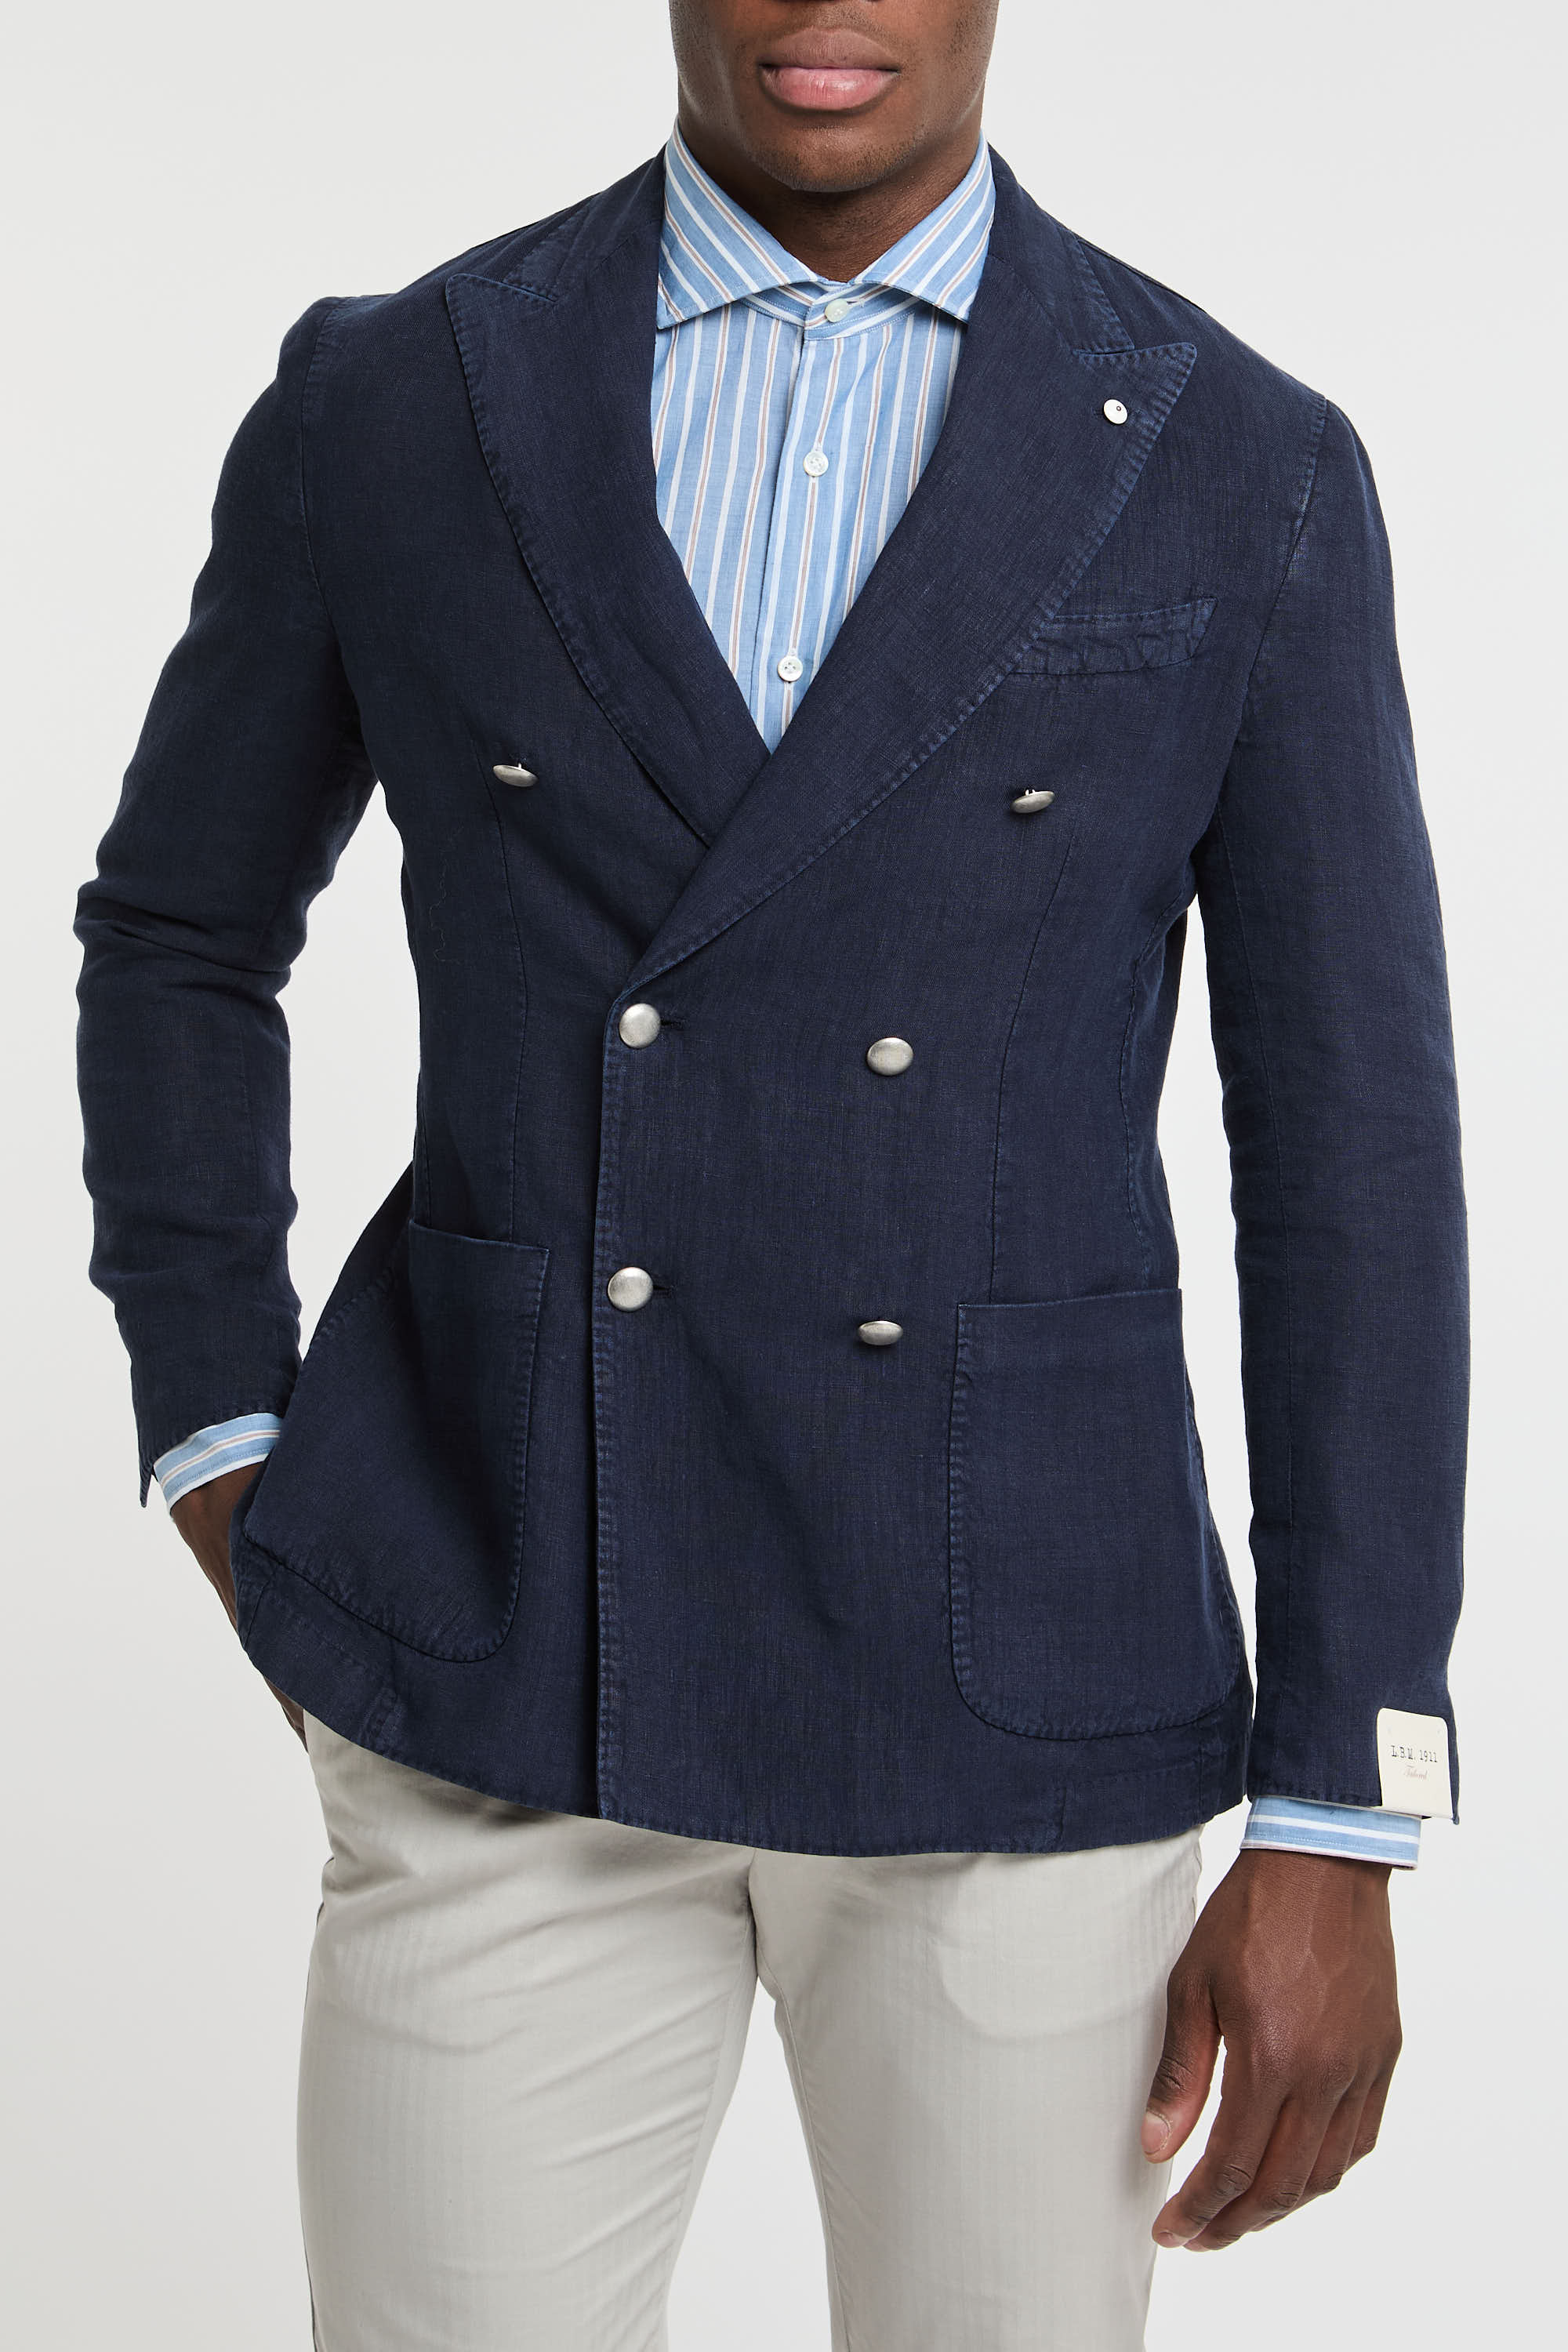 L.B.M. 1911 Double-Breasted Linen Blue Jacket-5